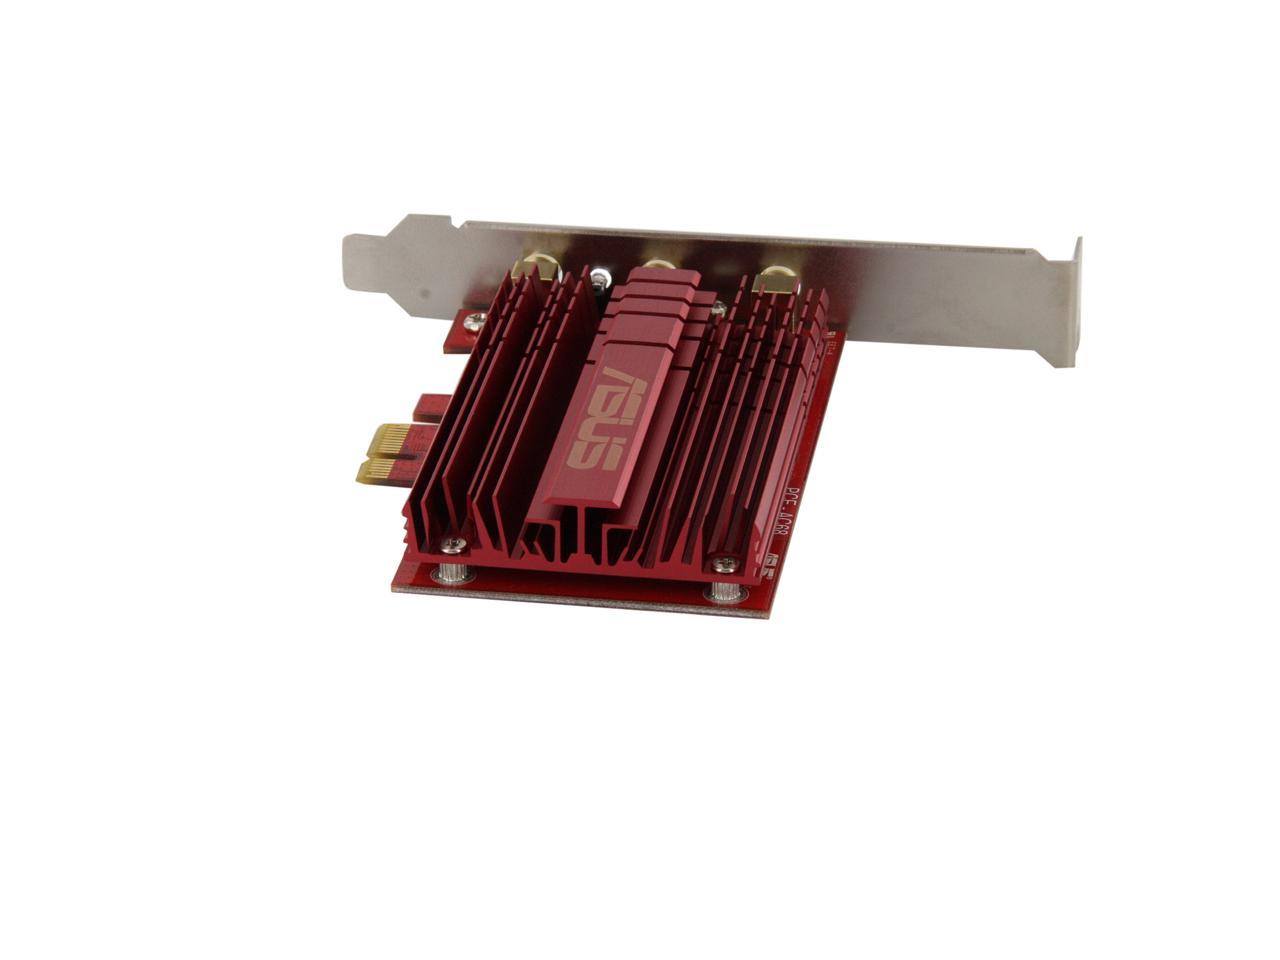 asus pce ac68 adapter